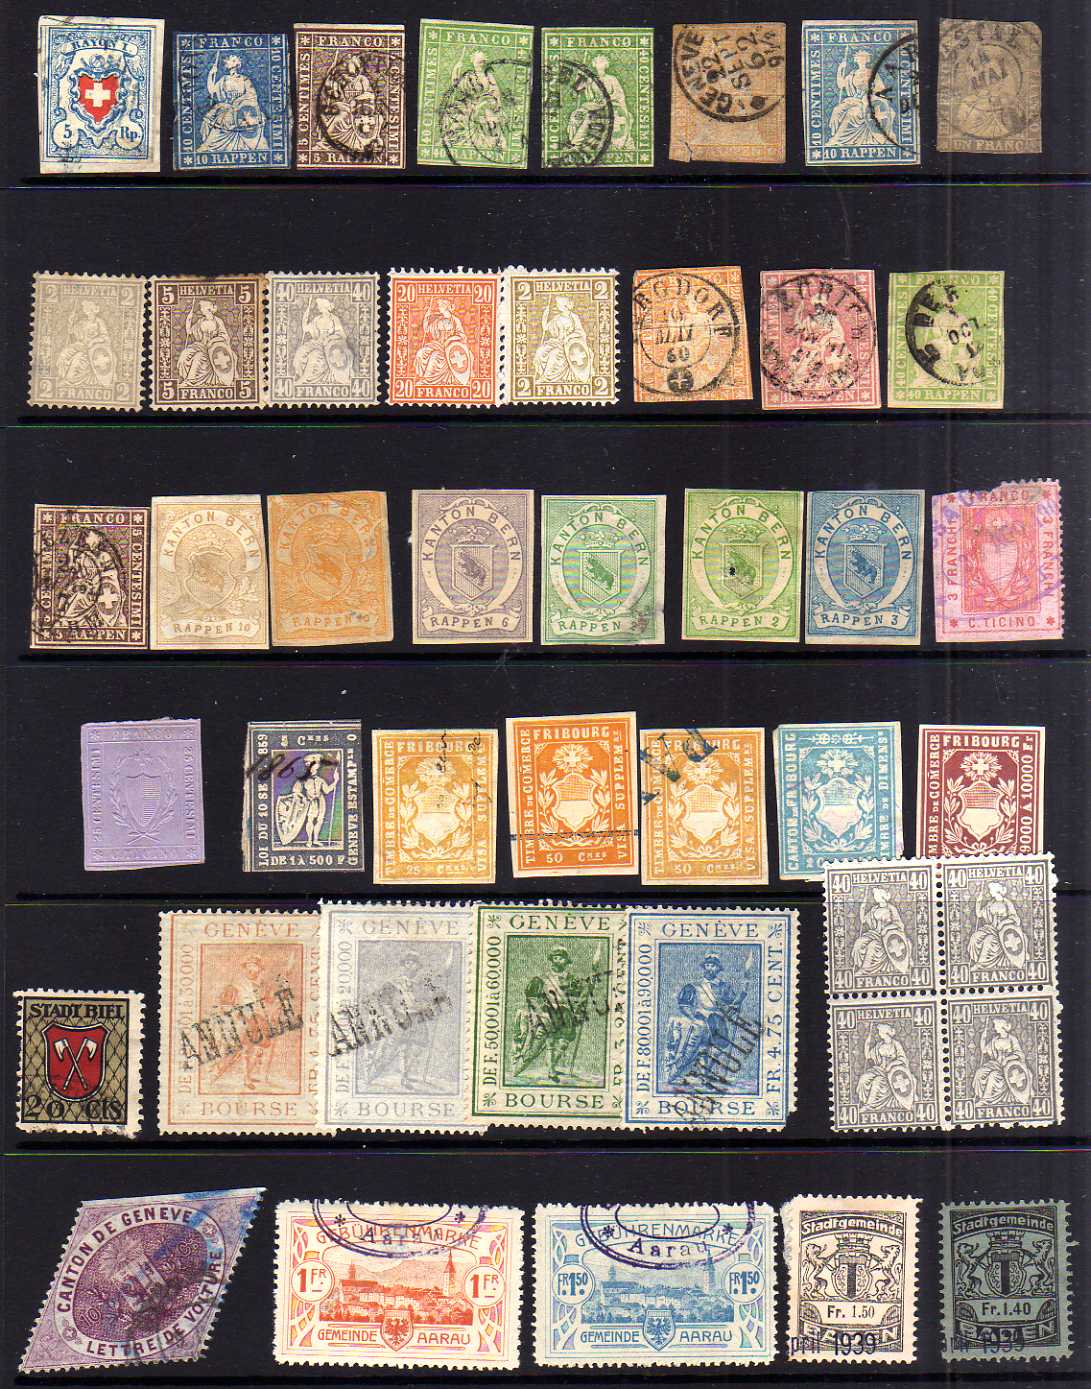 SWITZERLAND: SMALL MAINLY USED SELECTION EARLIES FROM IMPERFS, REVENUES WITH CANTONALS ETC.